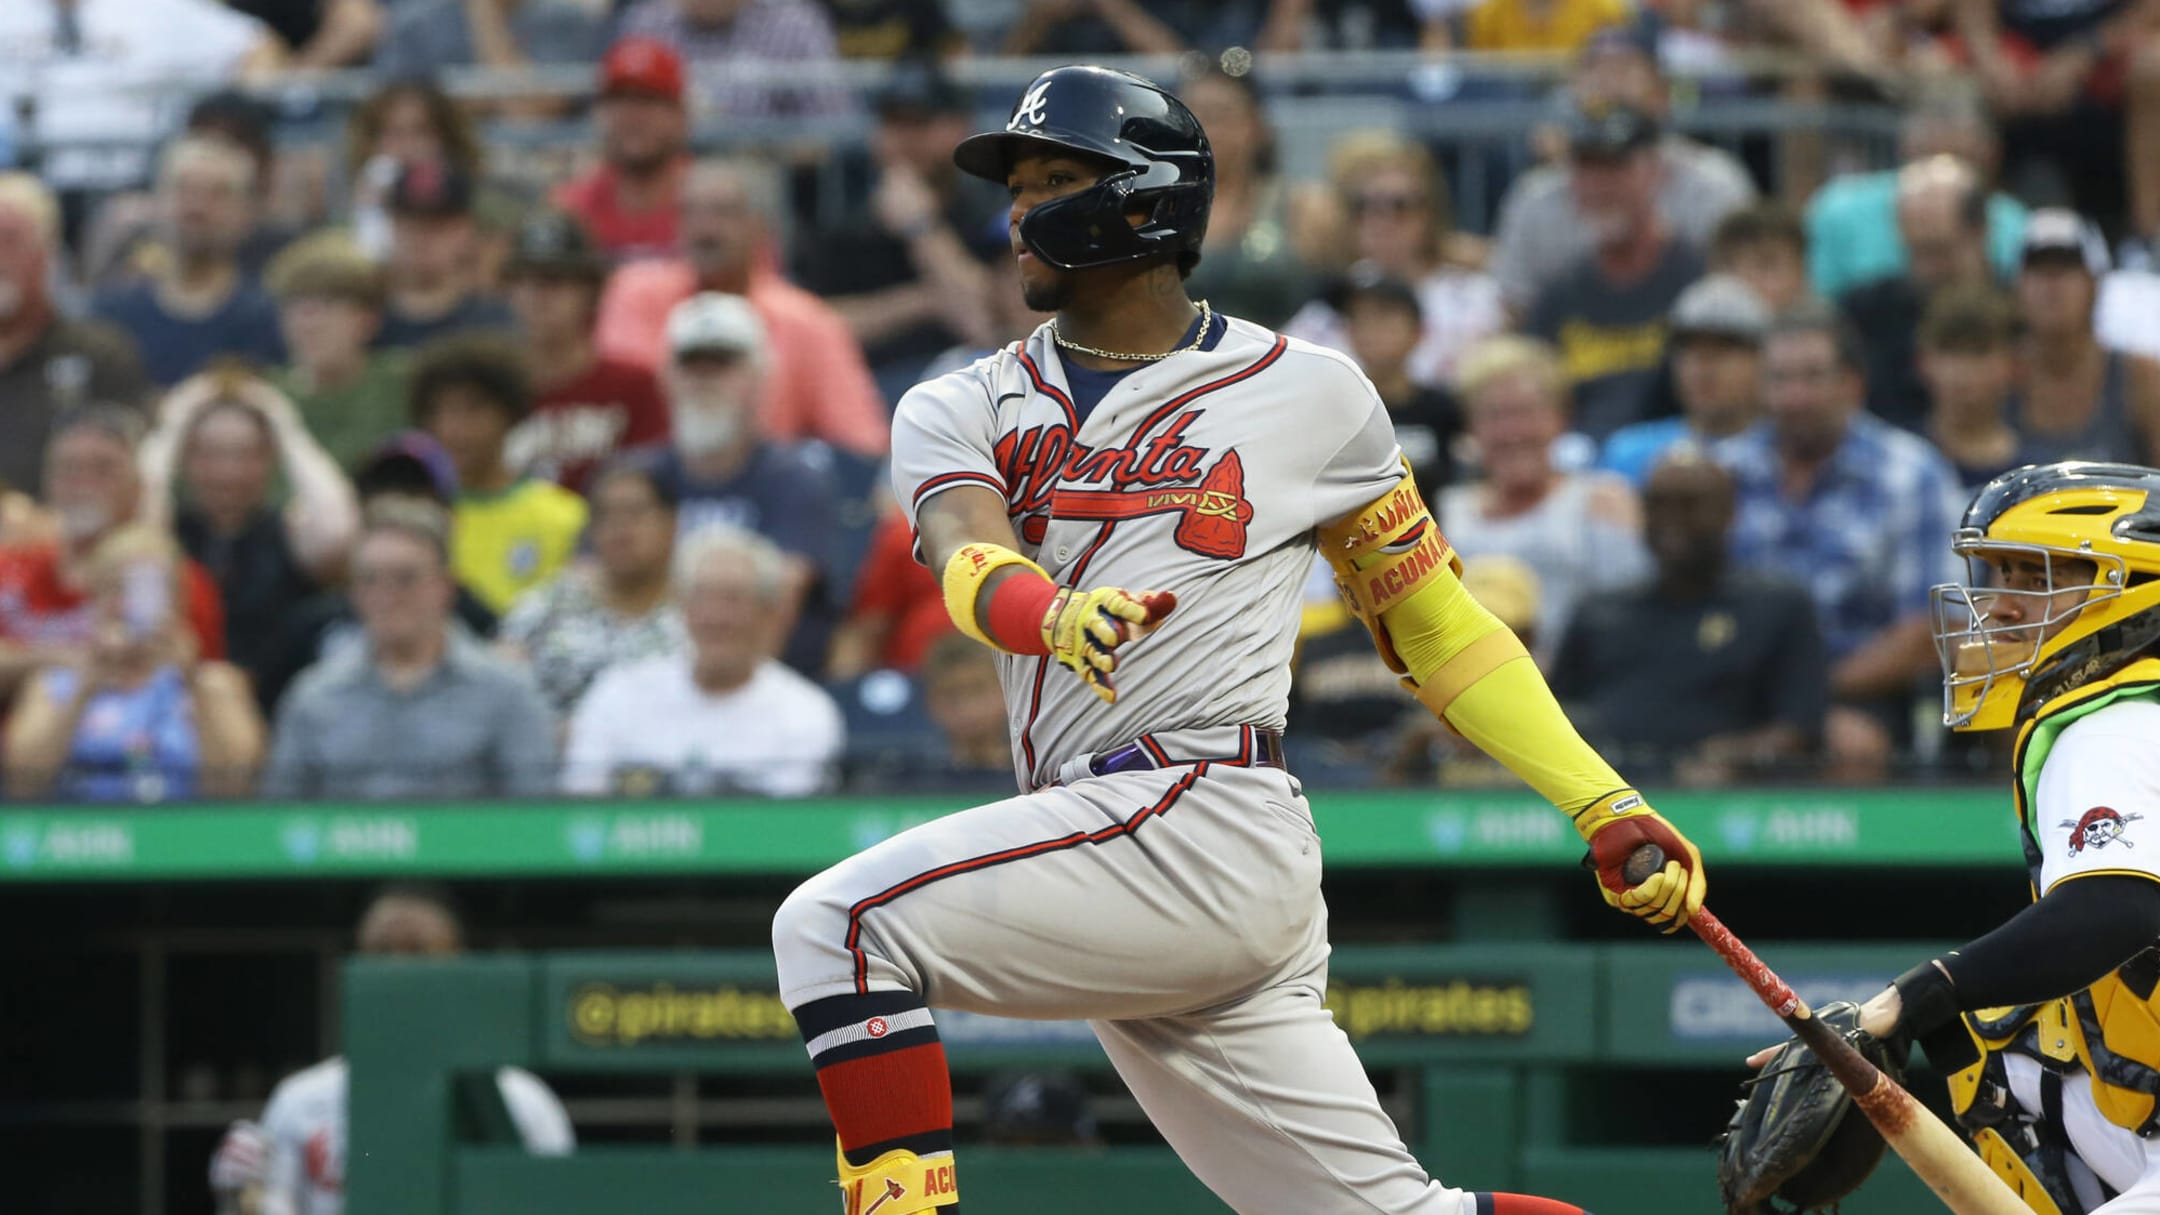 Ronald Acuna hoping for May return